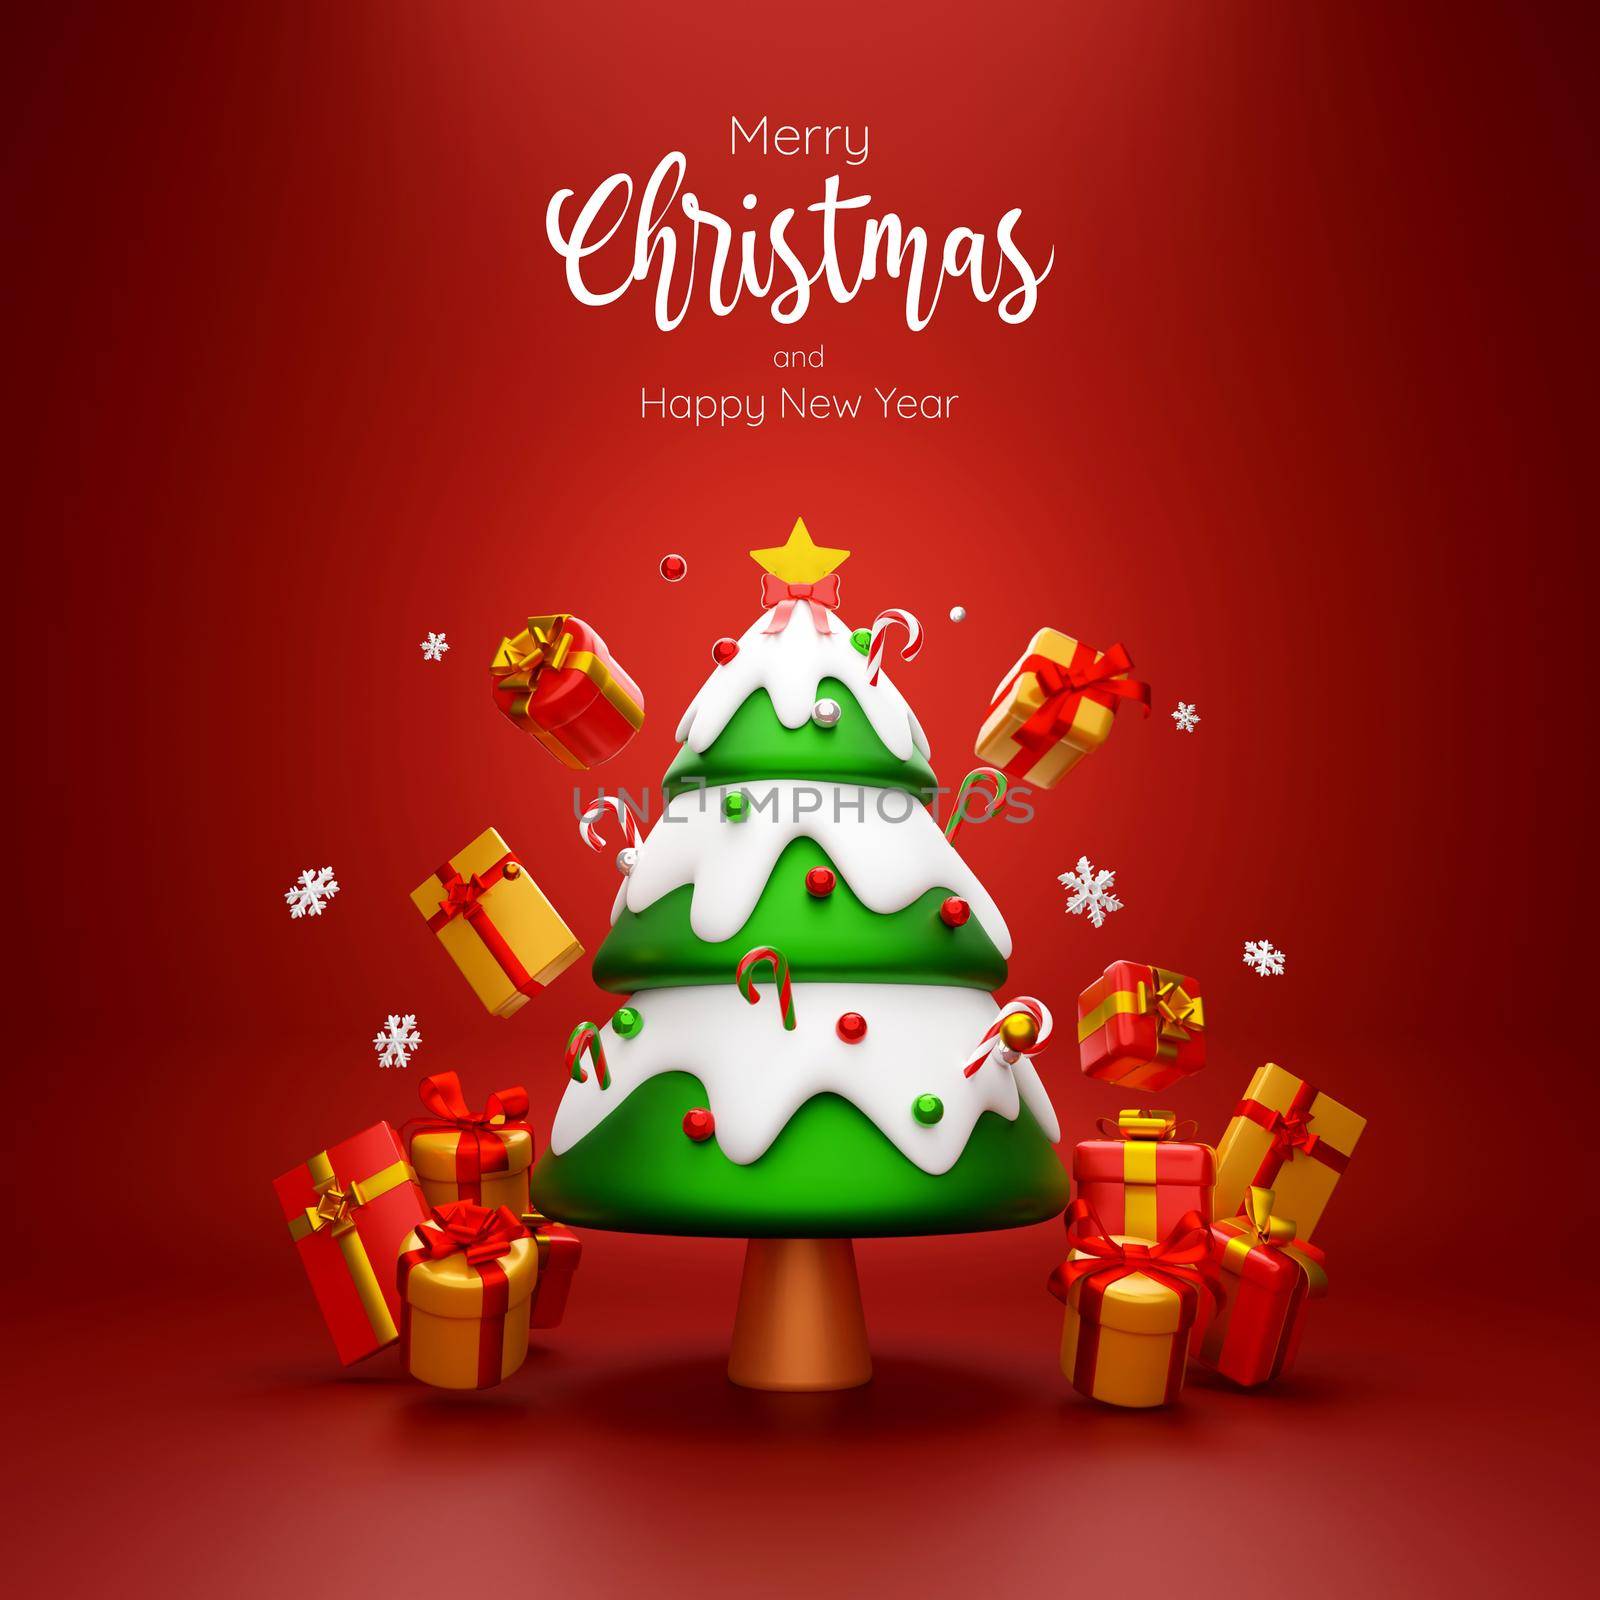 Scene of Christmas tree and gift box on red background, 3d illustration